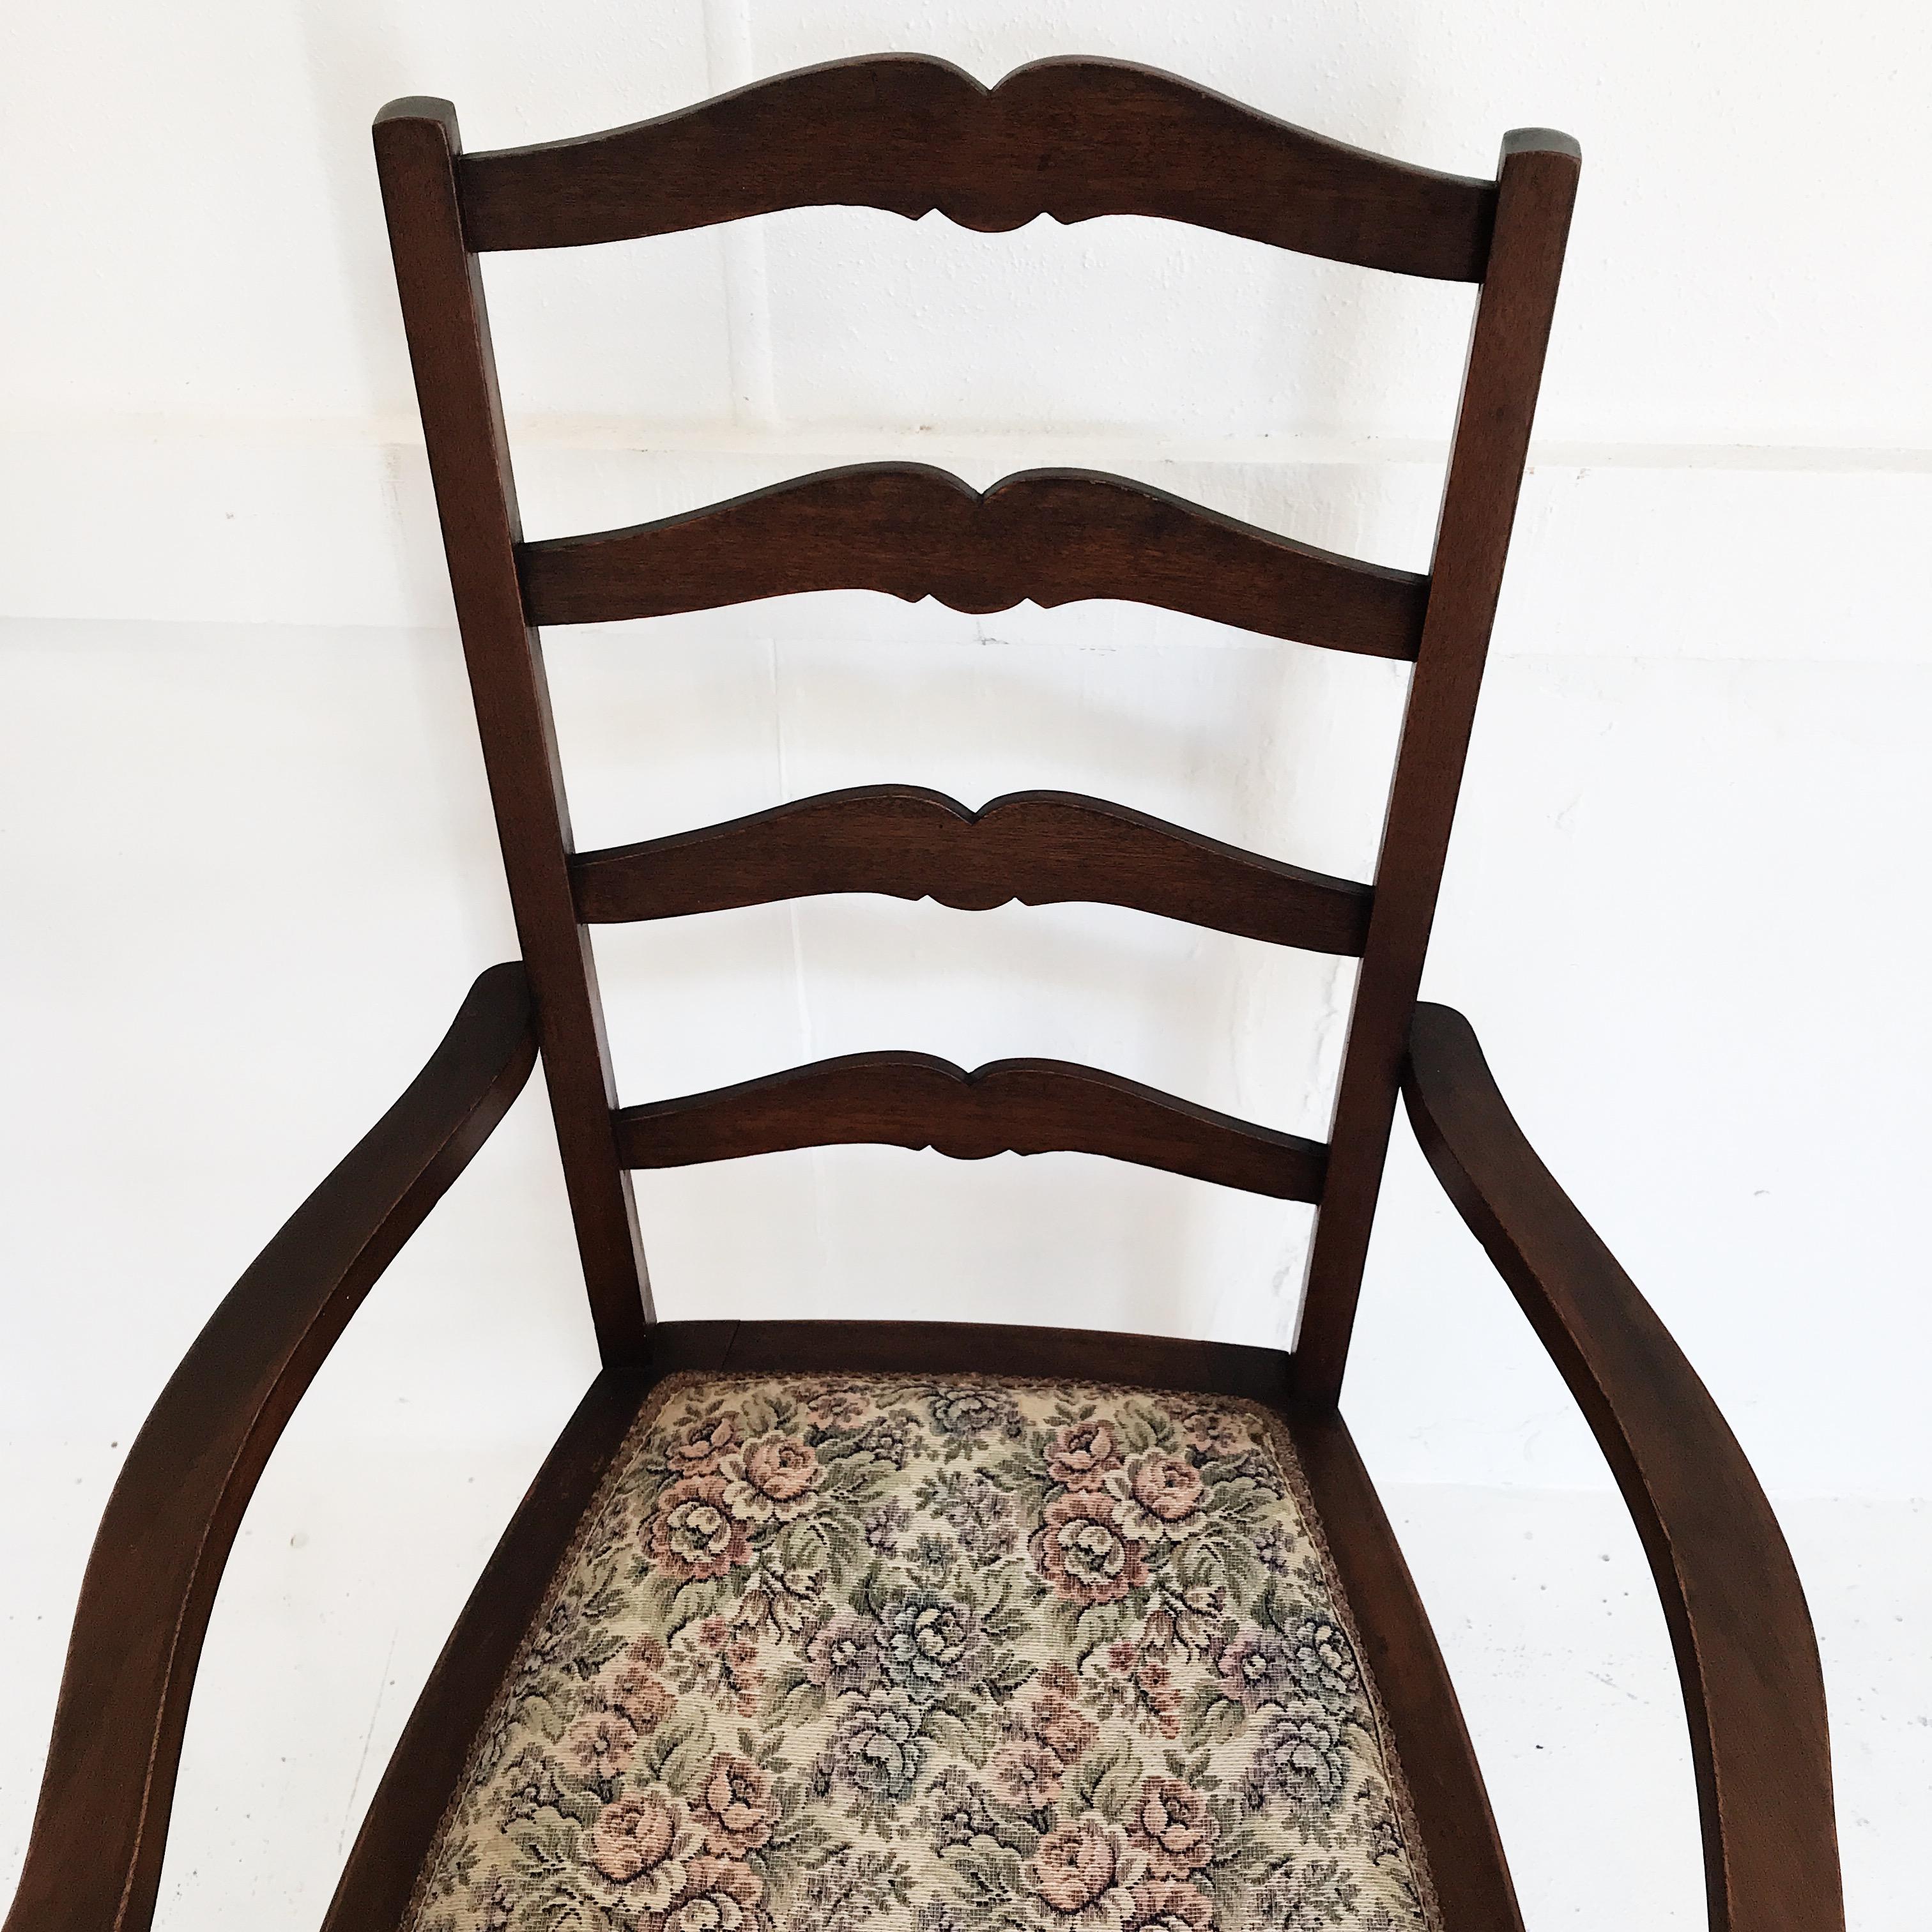 Early-20th Century Ladder Back Chair by Beard Watson Limited, Sydney, Australia For Sale 3